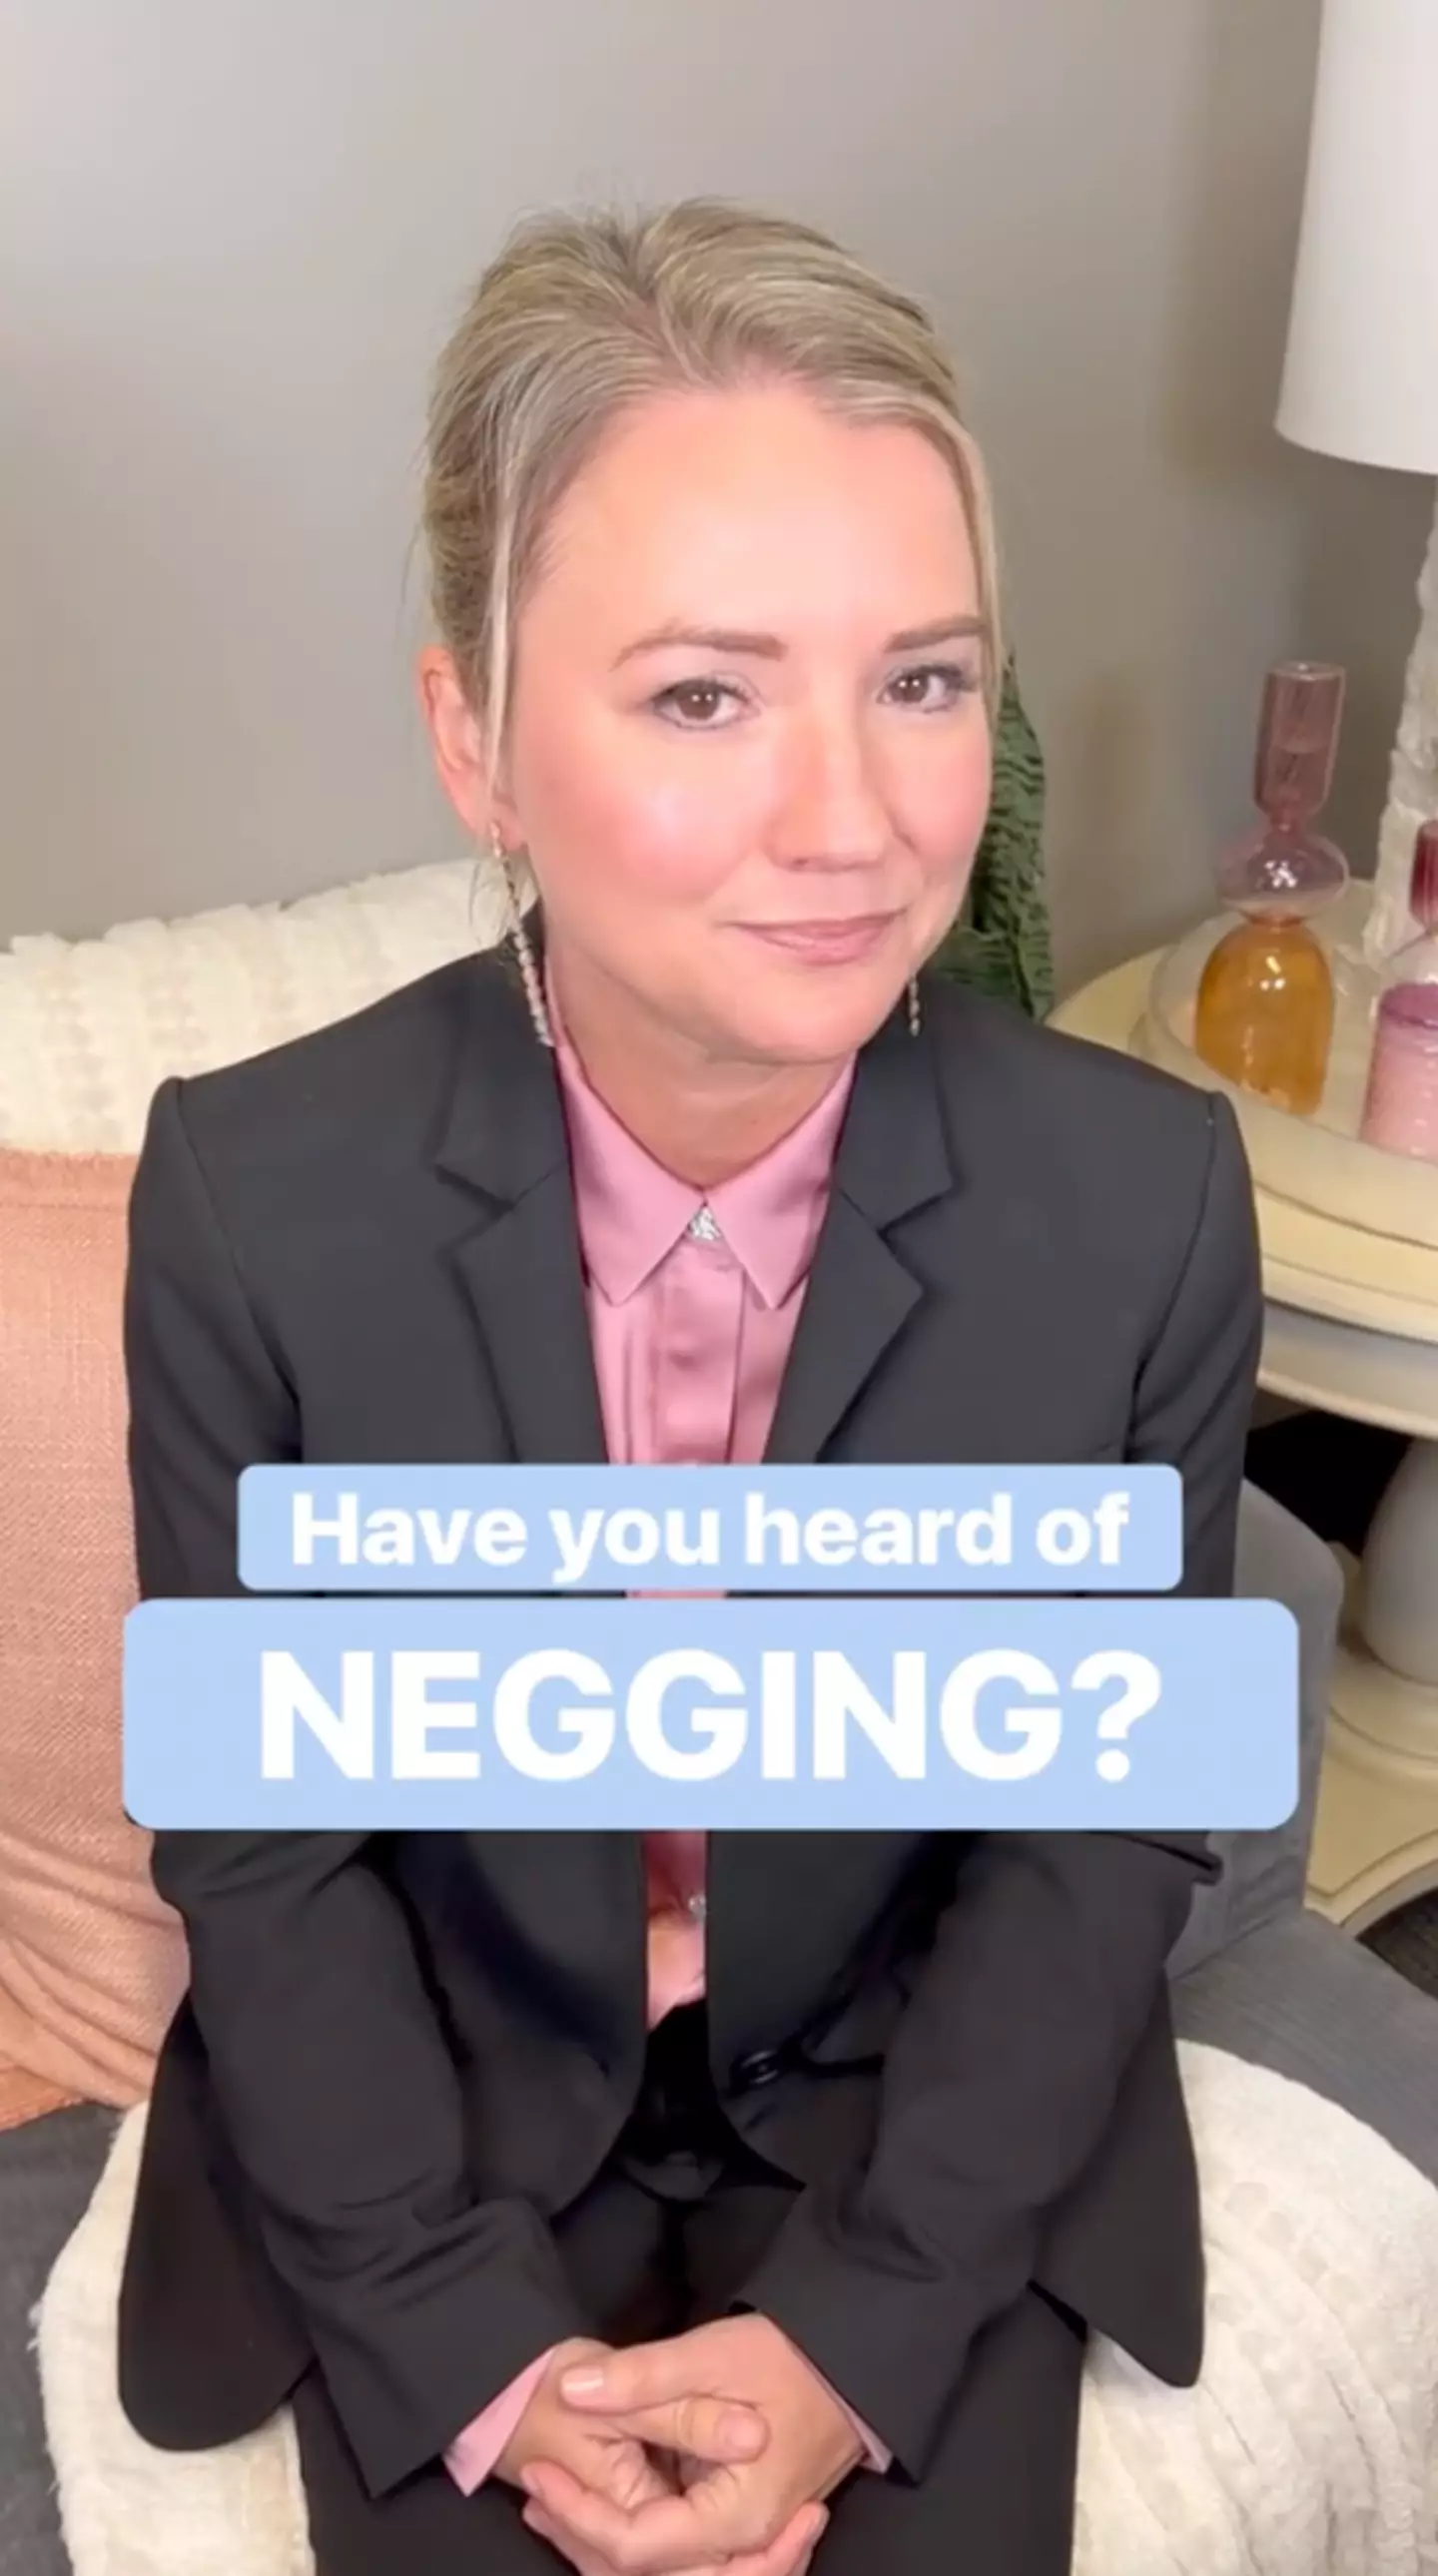 Dr Justine Weber - who specialises in narcissistic abuse and trauma therapy - has taken to TikTok (@drjustineweber) to explain what negging is.